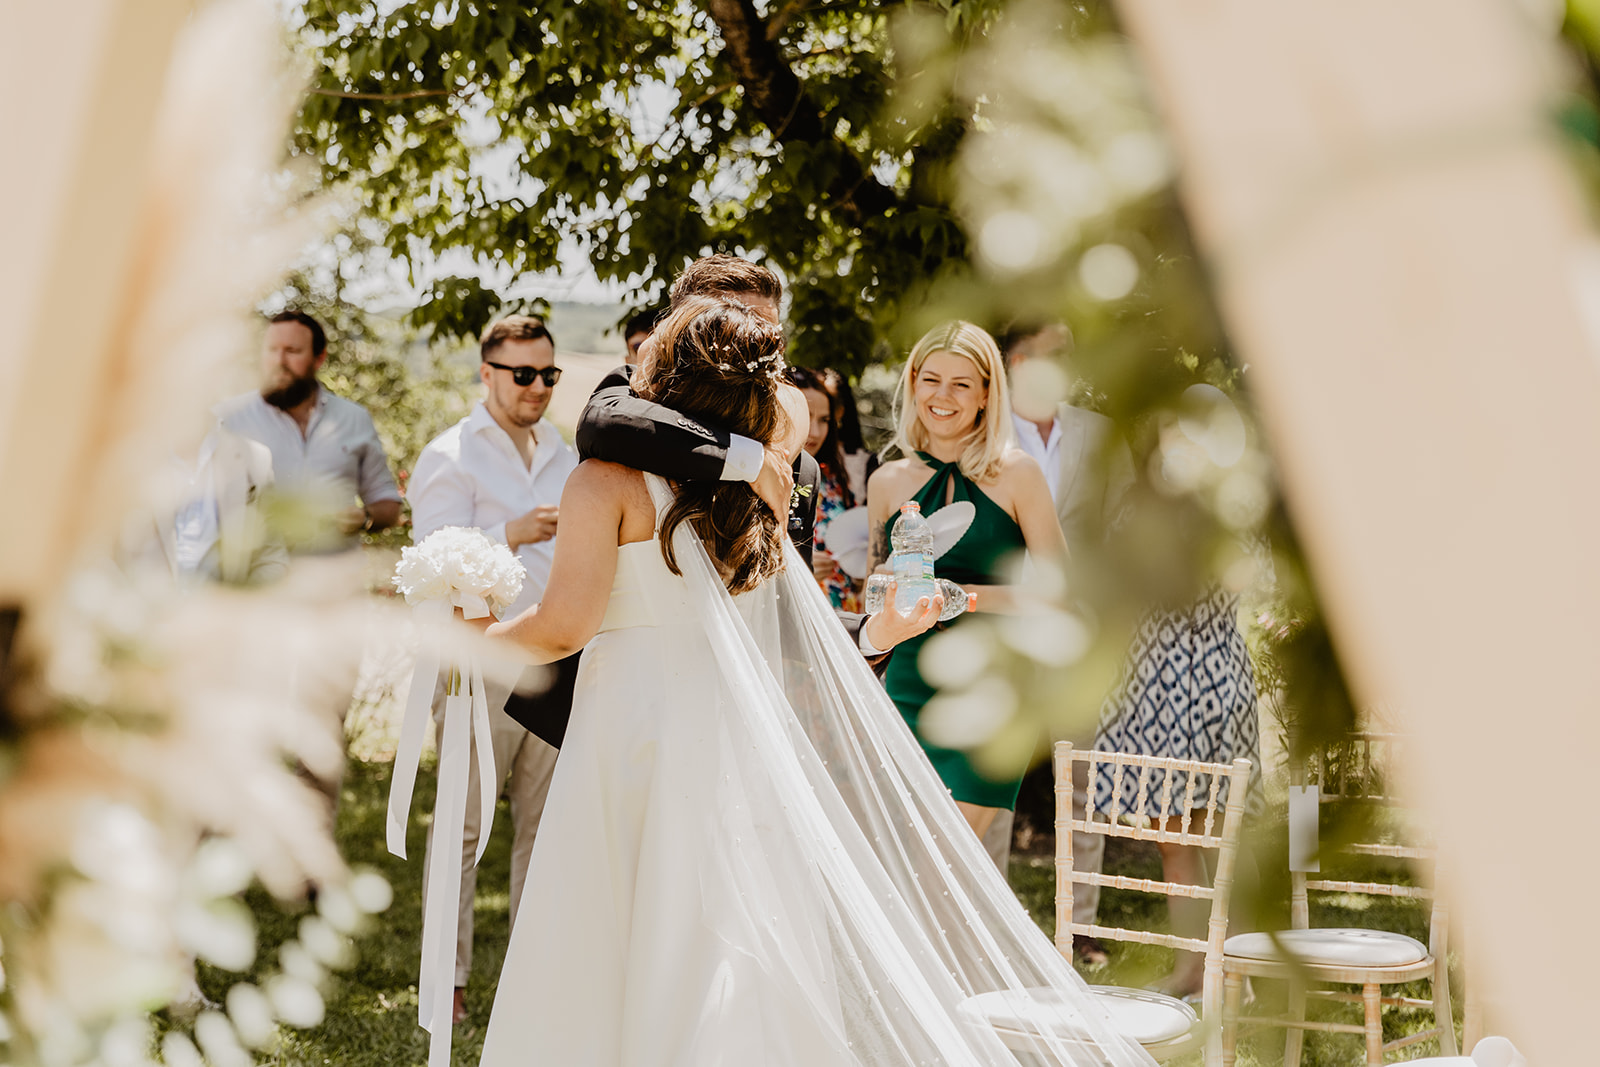 Bride hugging at a Destination Wedding in France. Photography & Videography by OliveJoy Photography